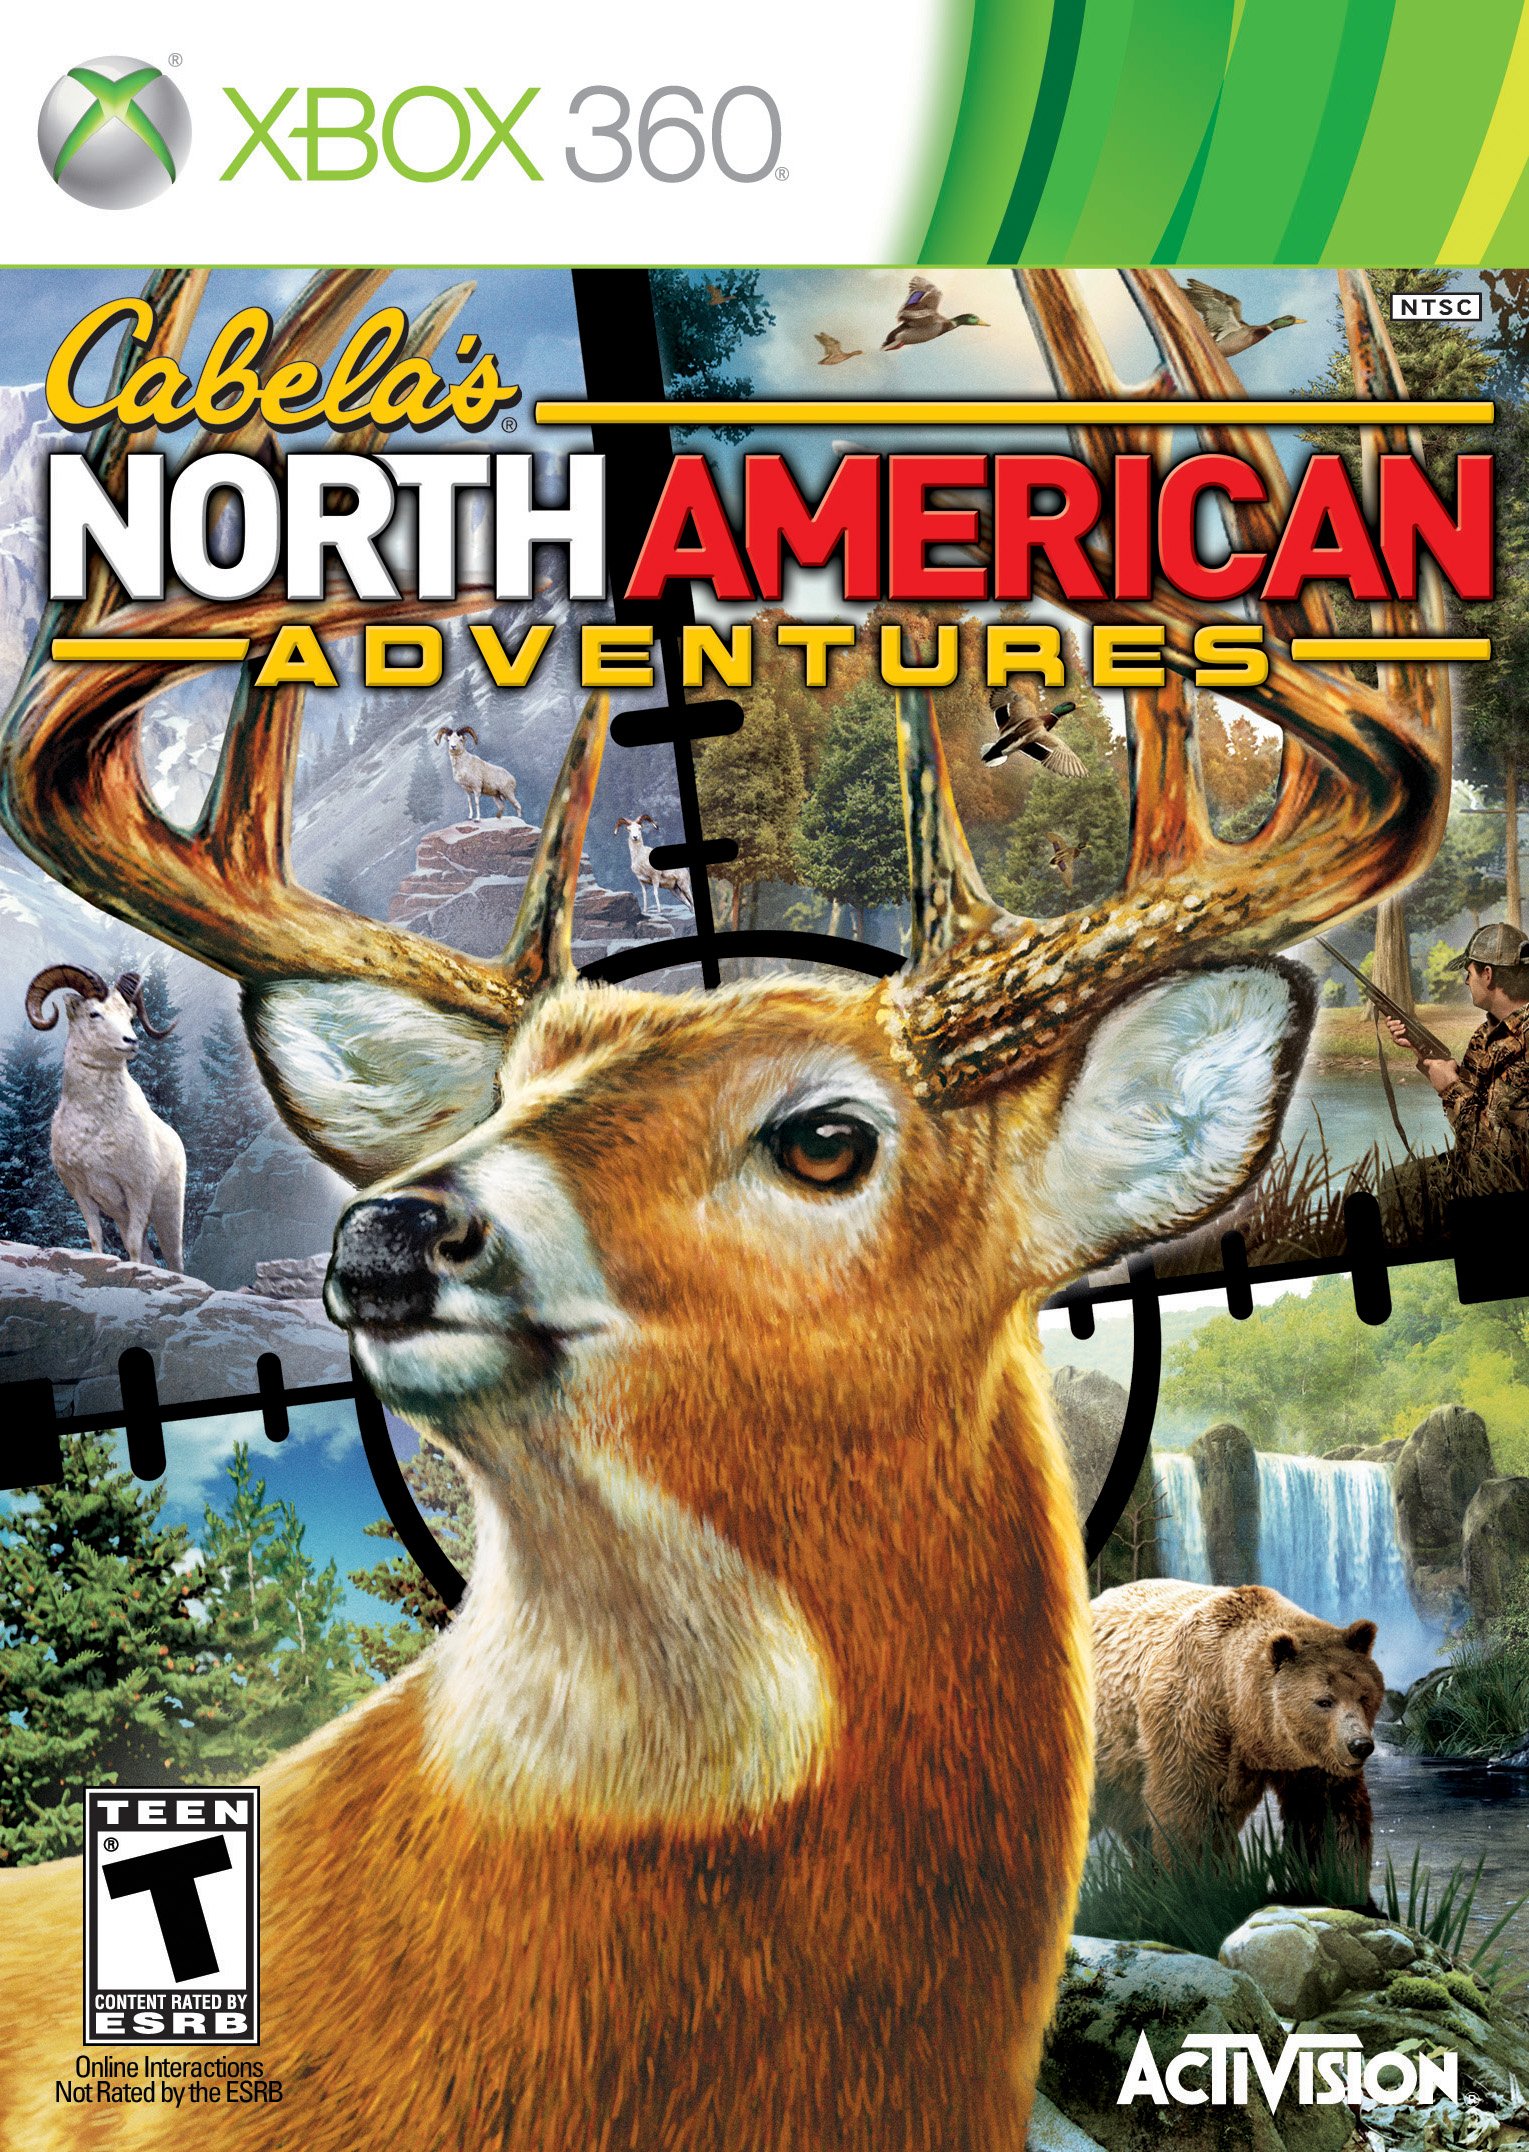 Cabela's North American Adventures 2011 Release Date (Xbox 360, PS3, PSP)1529 x 2152